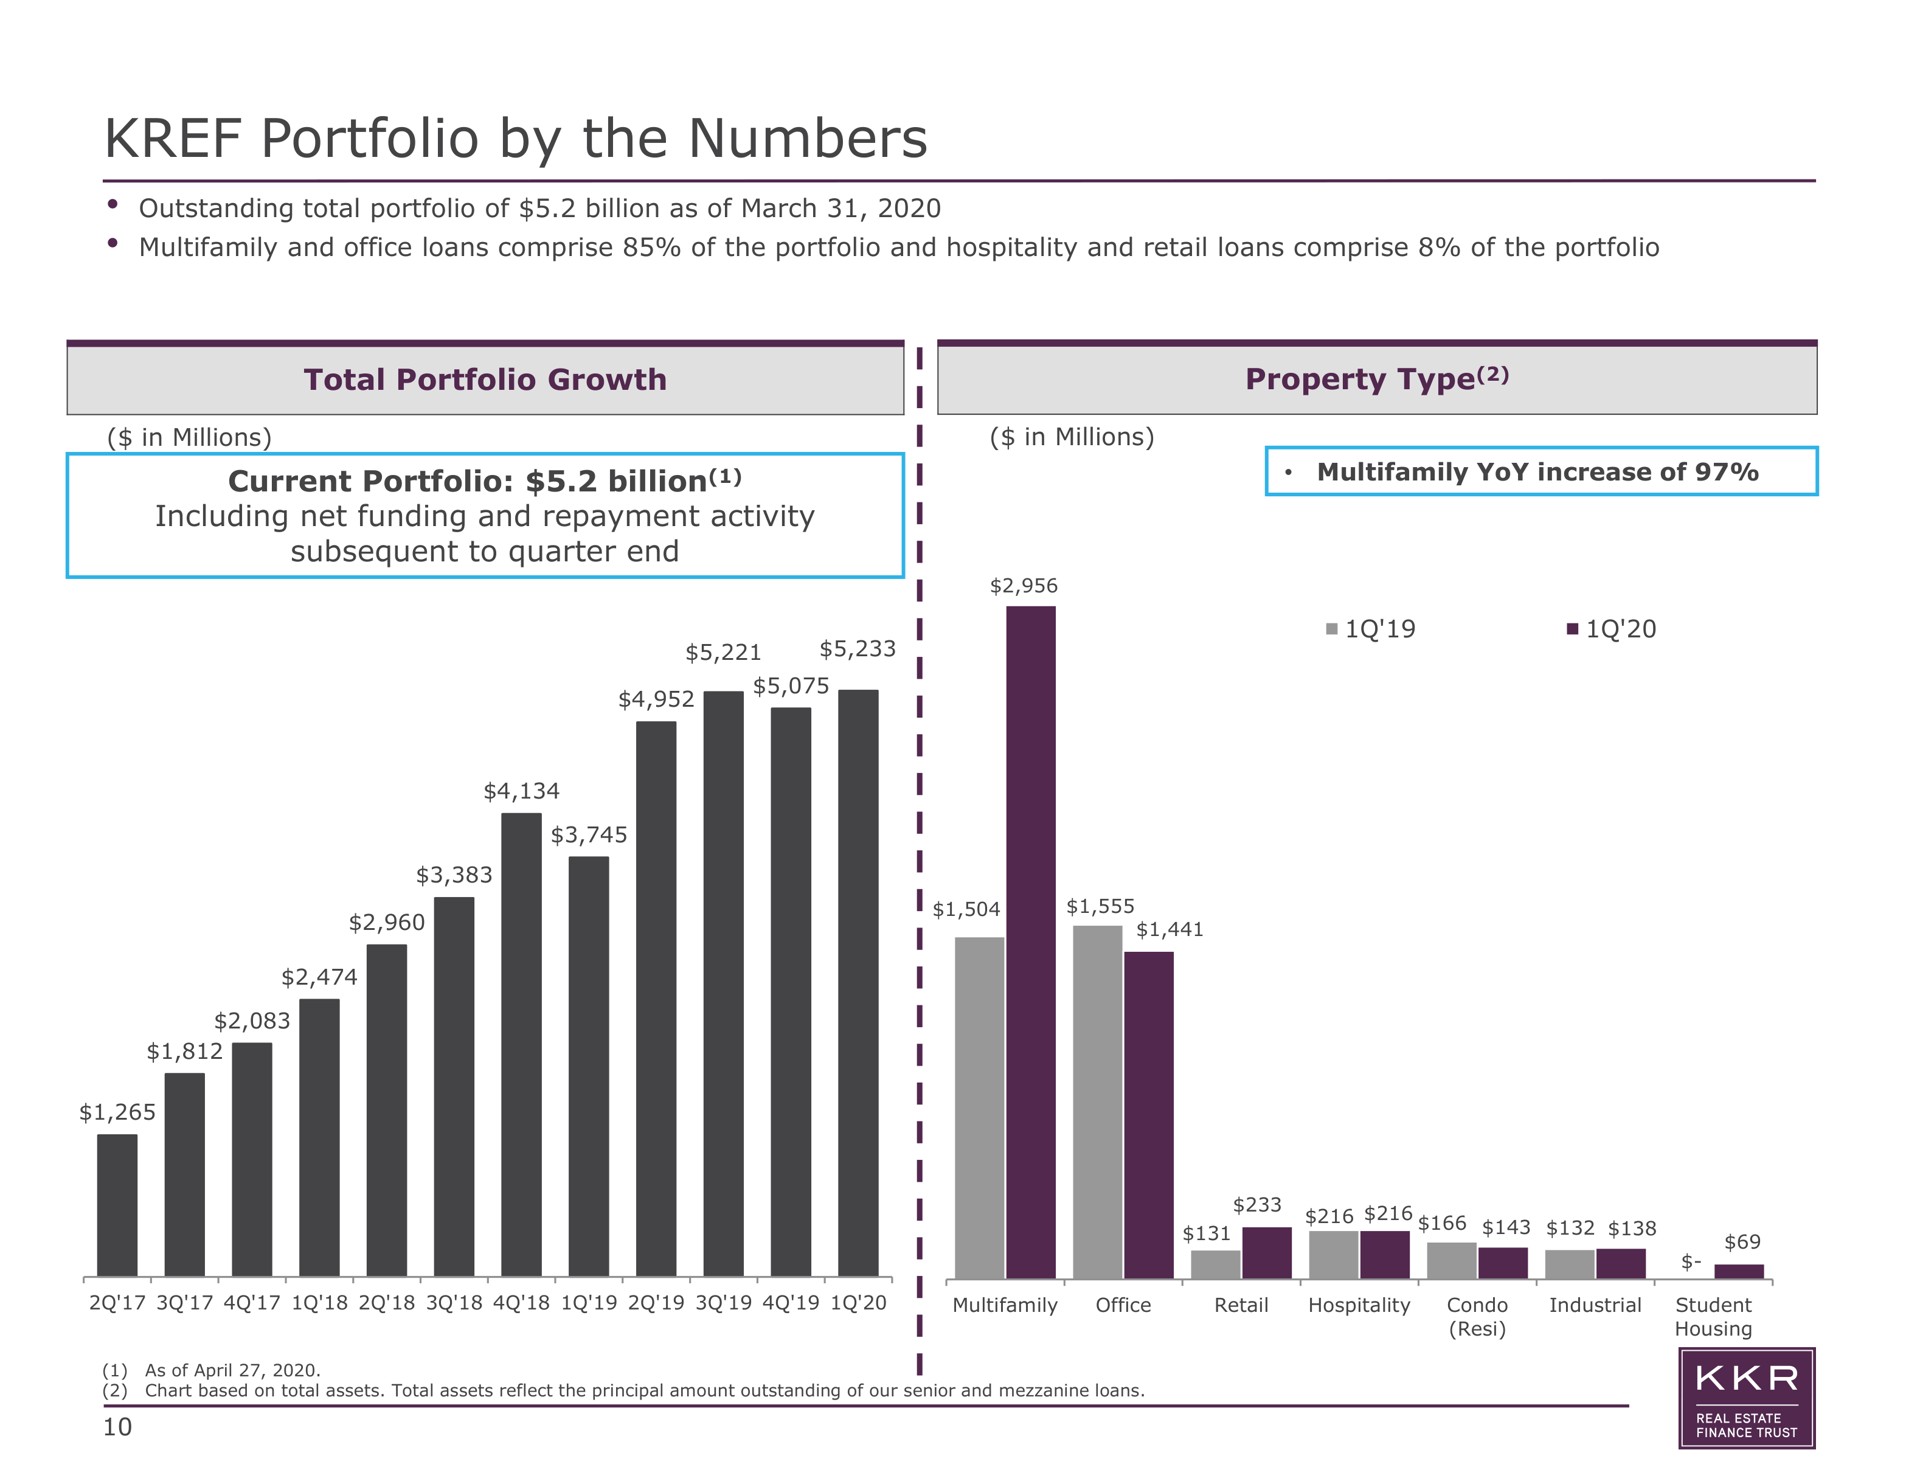 portfolio by the numbers total portfolio growth property type current portfolio billion including net funding and repayment activity subsequent to quarter end | KKR Real Estate Finance Trust